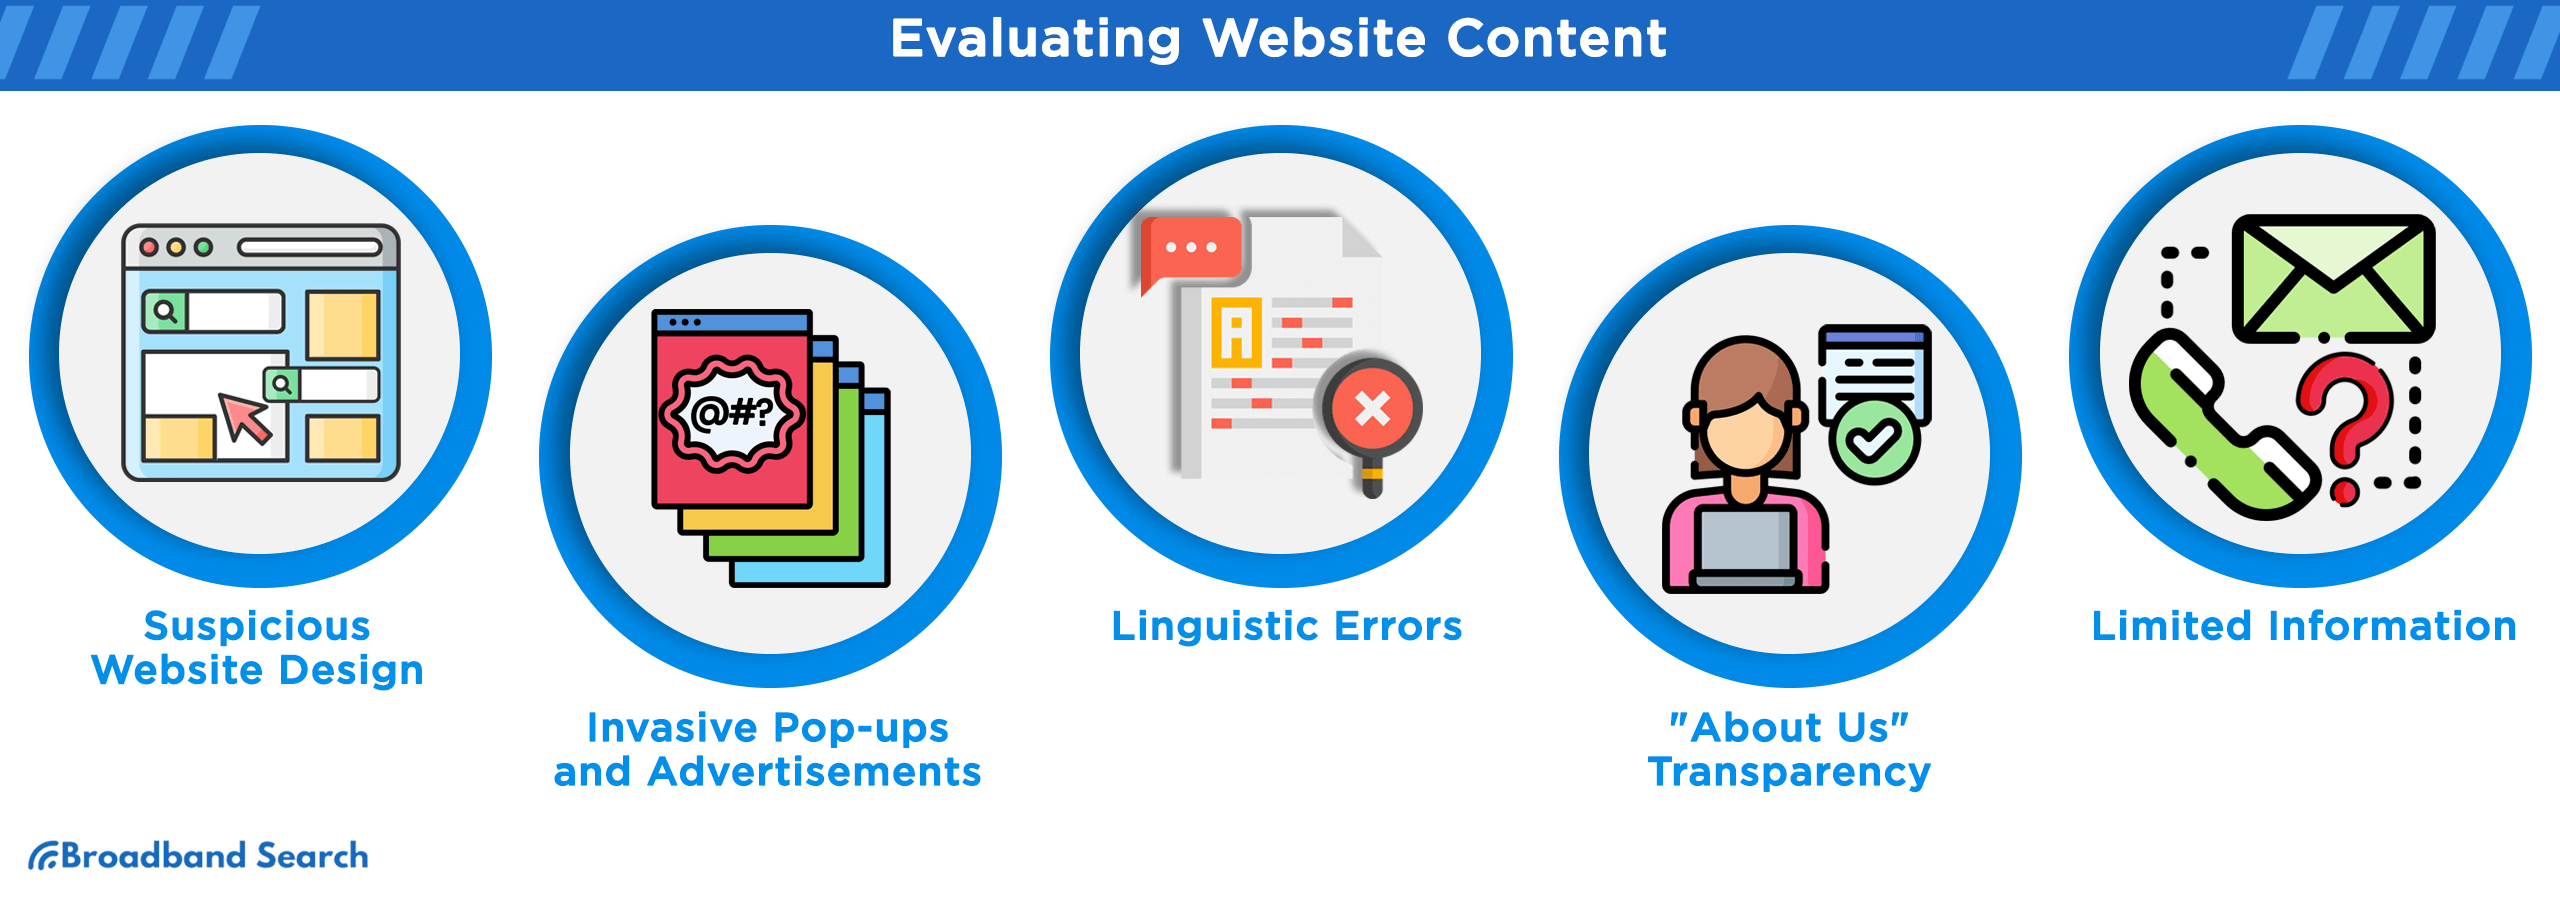 Tips on how to evaluate website content